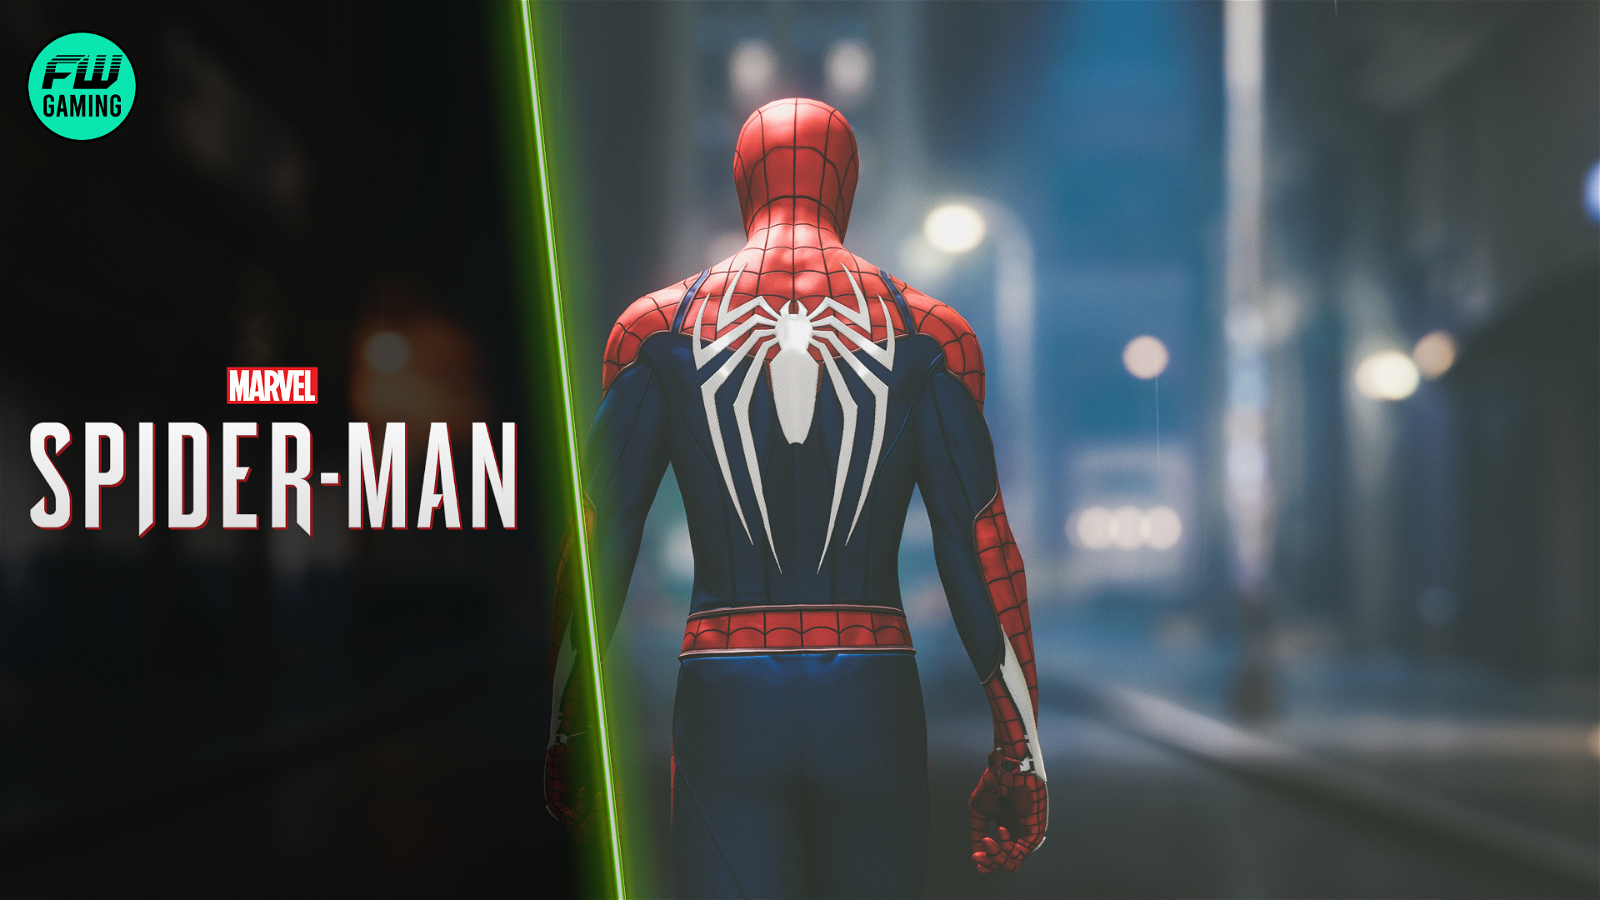 After Marvel's Spider-Man 'Puddlegate' in 2018, Insomniac Went All Out to Avoid Disappointment